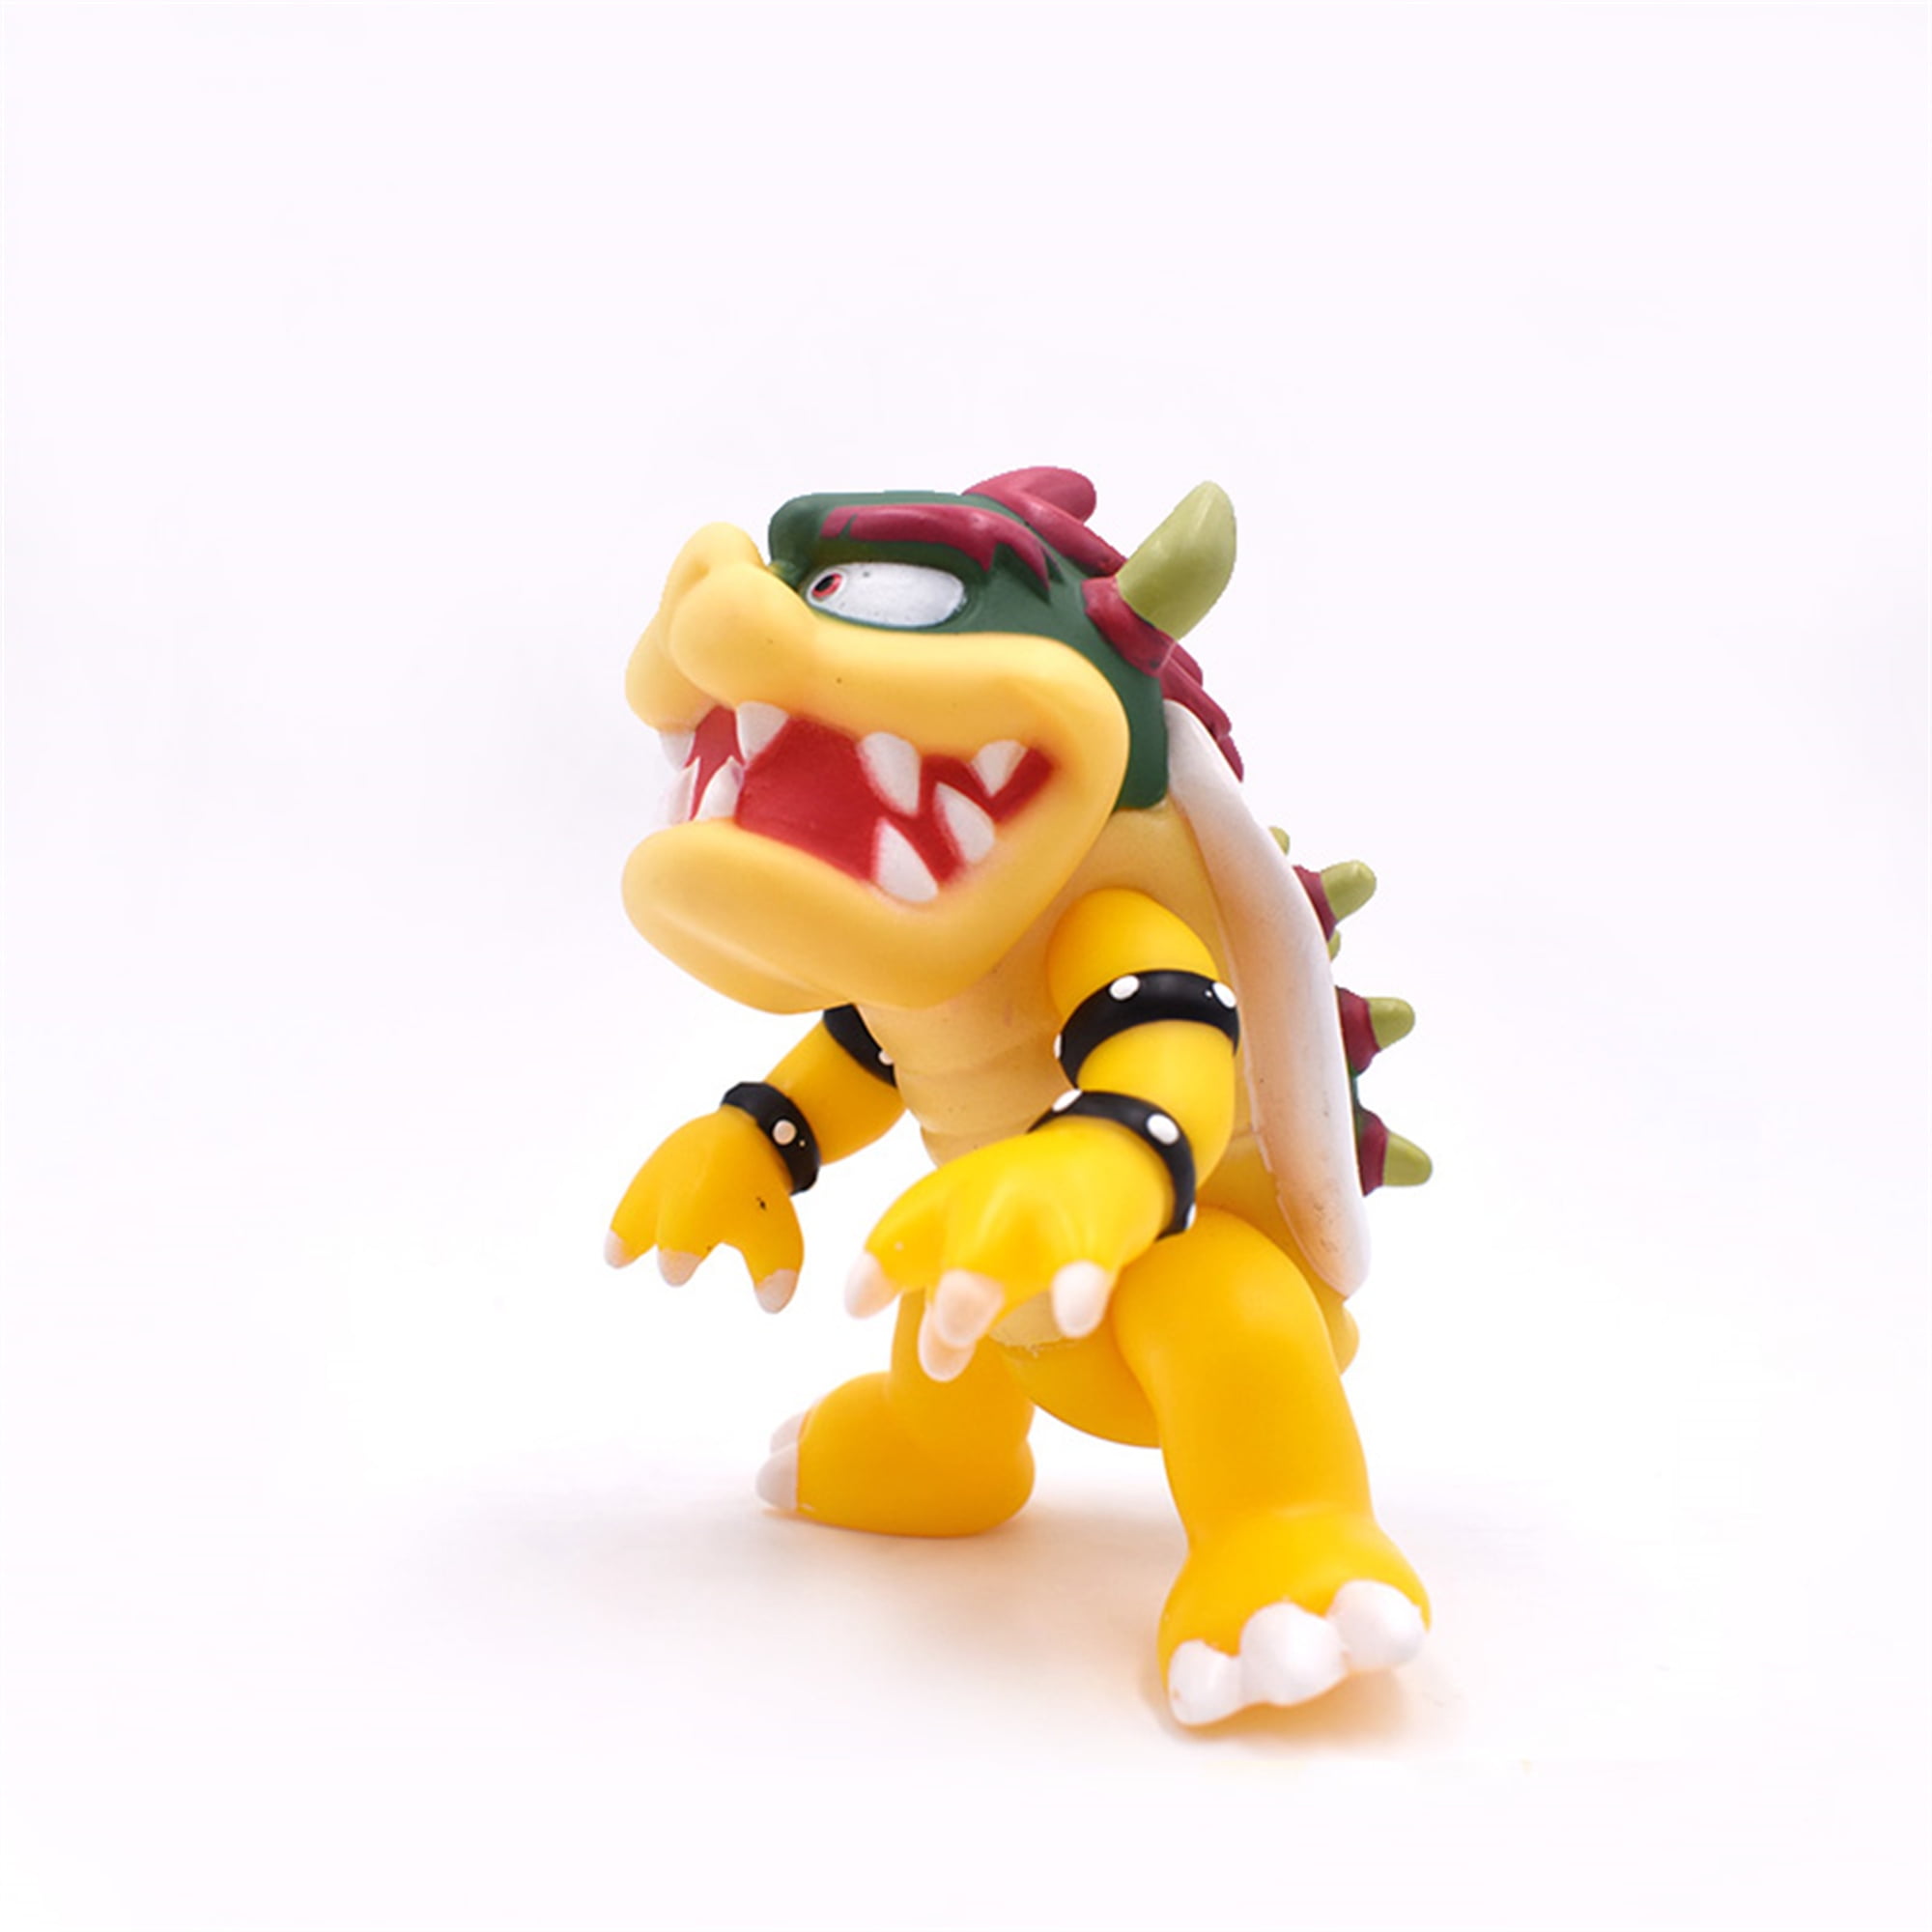 Bowser Koopa Plastic PVC Figure Doll Toy Collectible 9" 4" New Super Mario Bros 